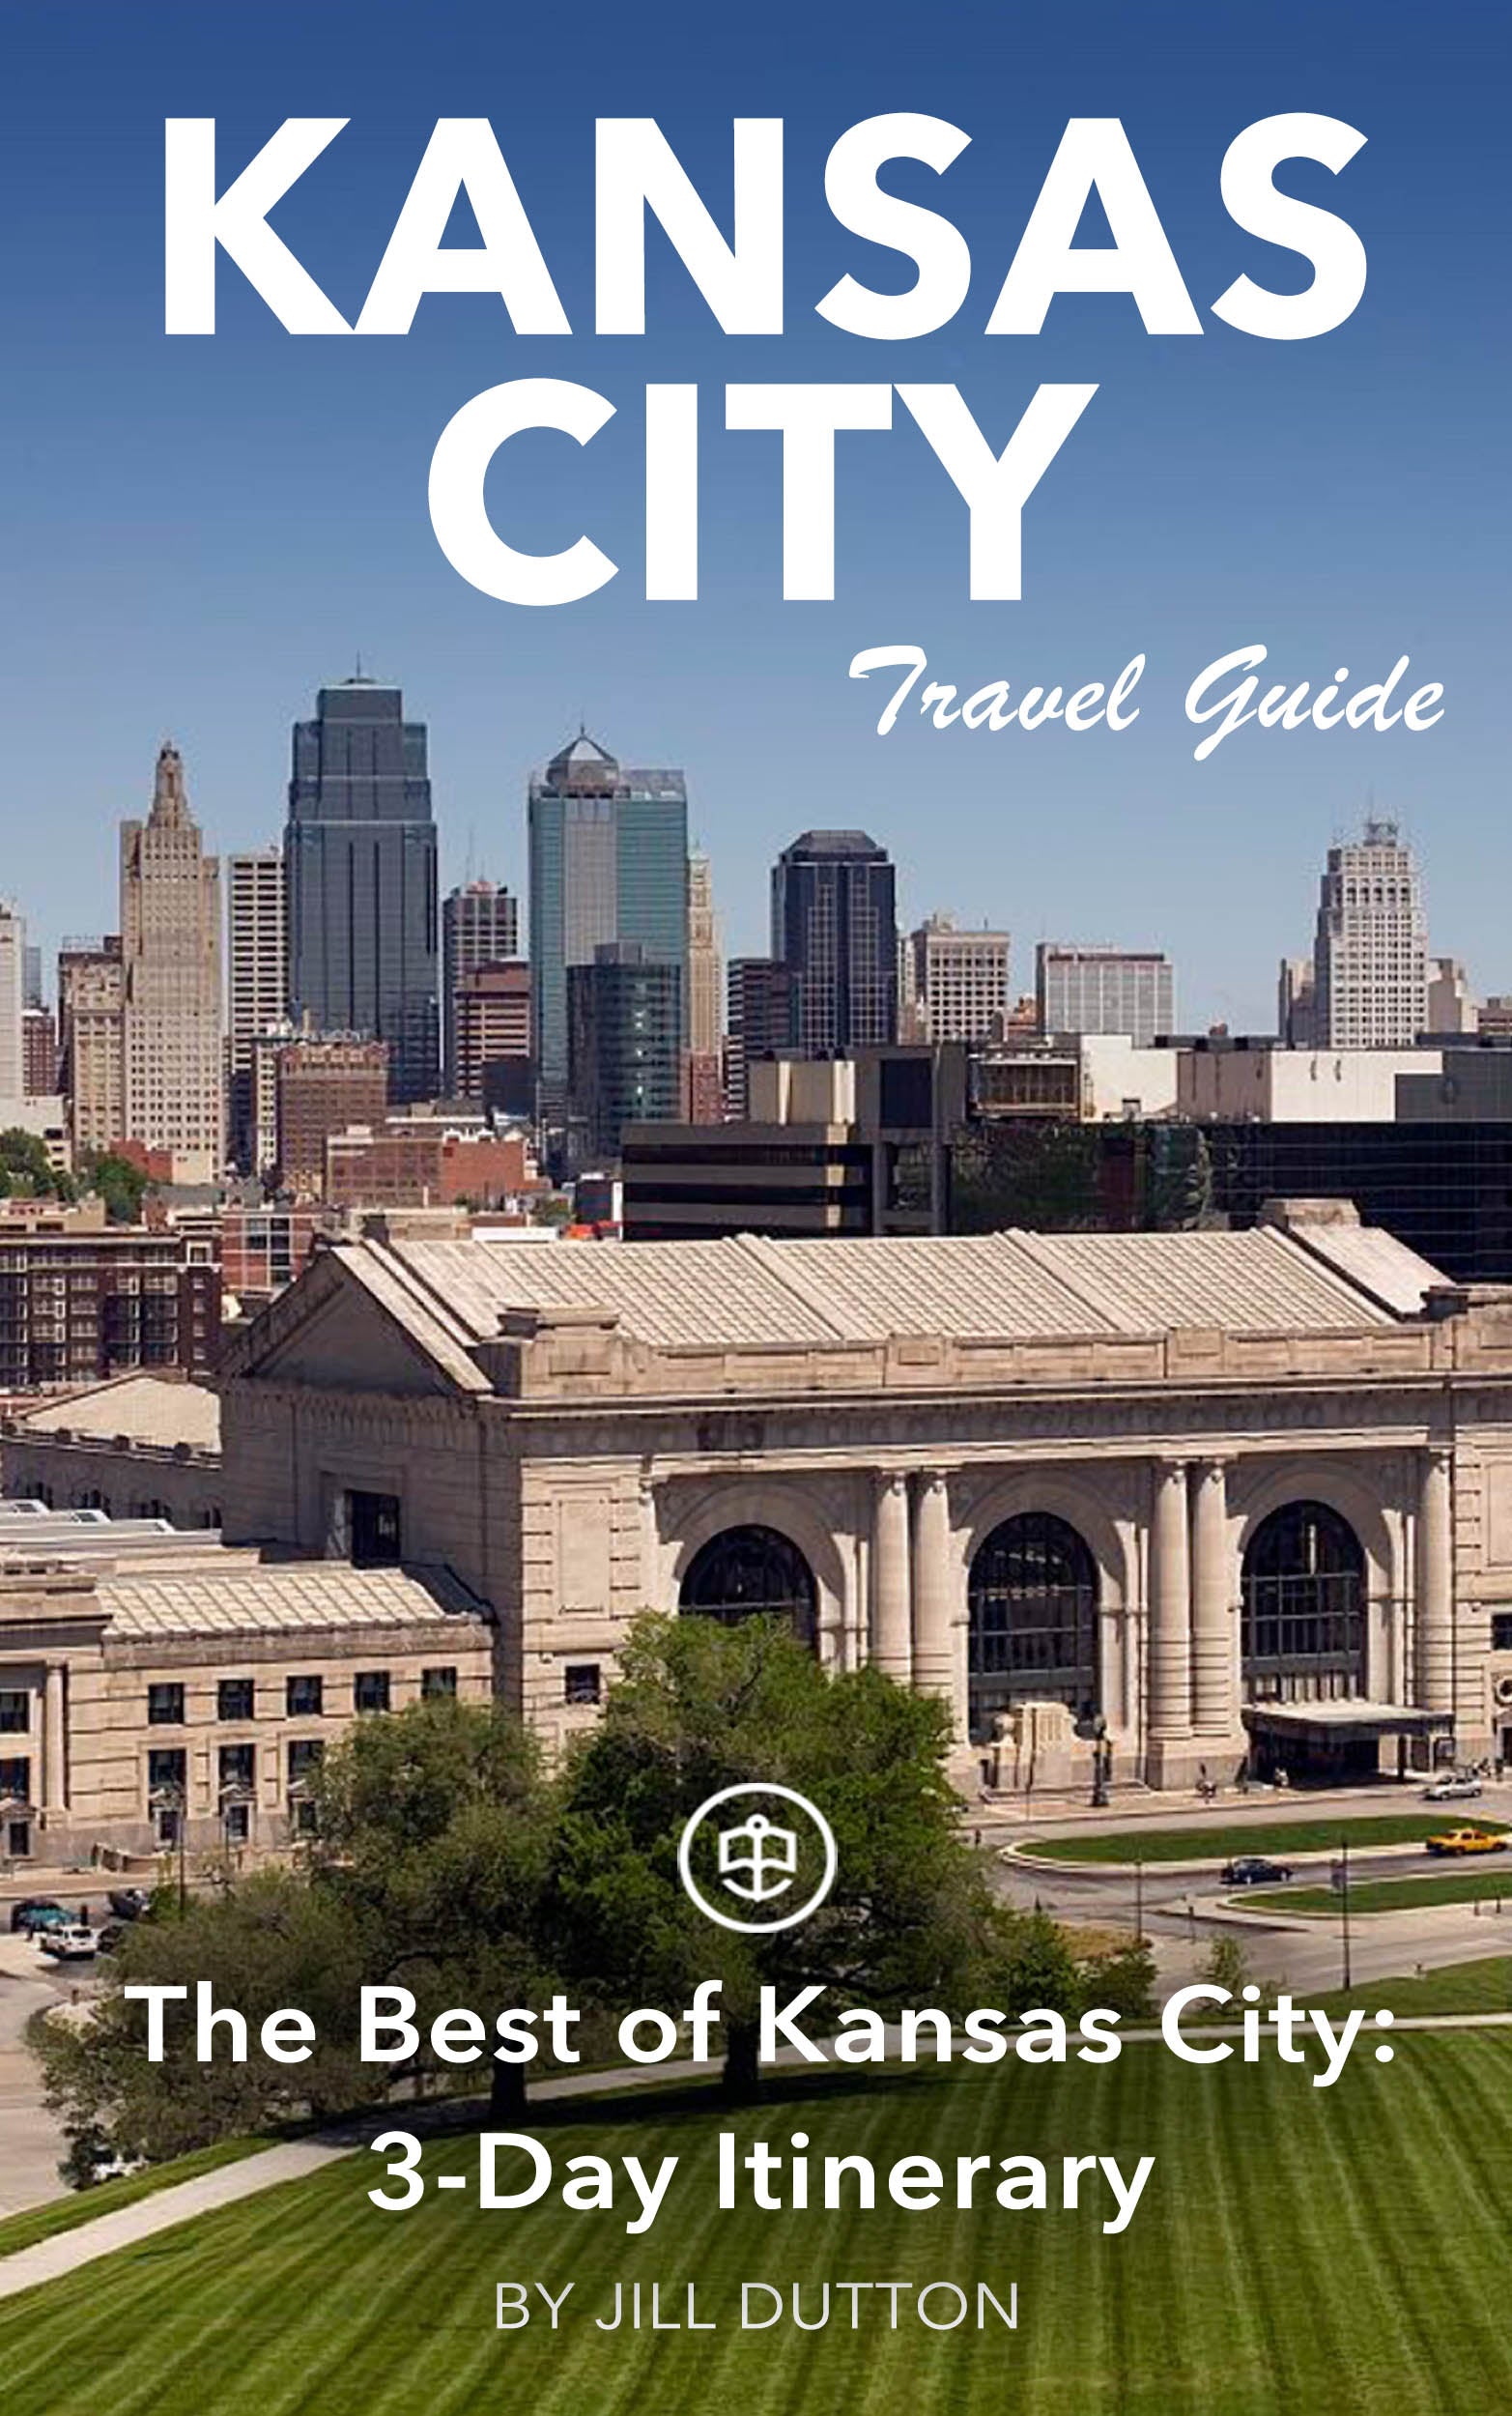 The Best of Kansas City: 3-Day Itinerary